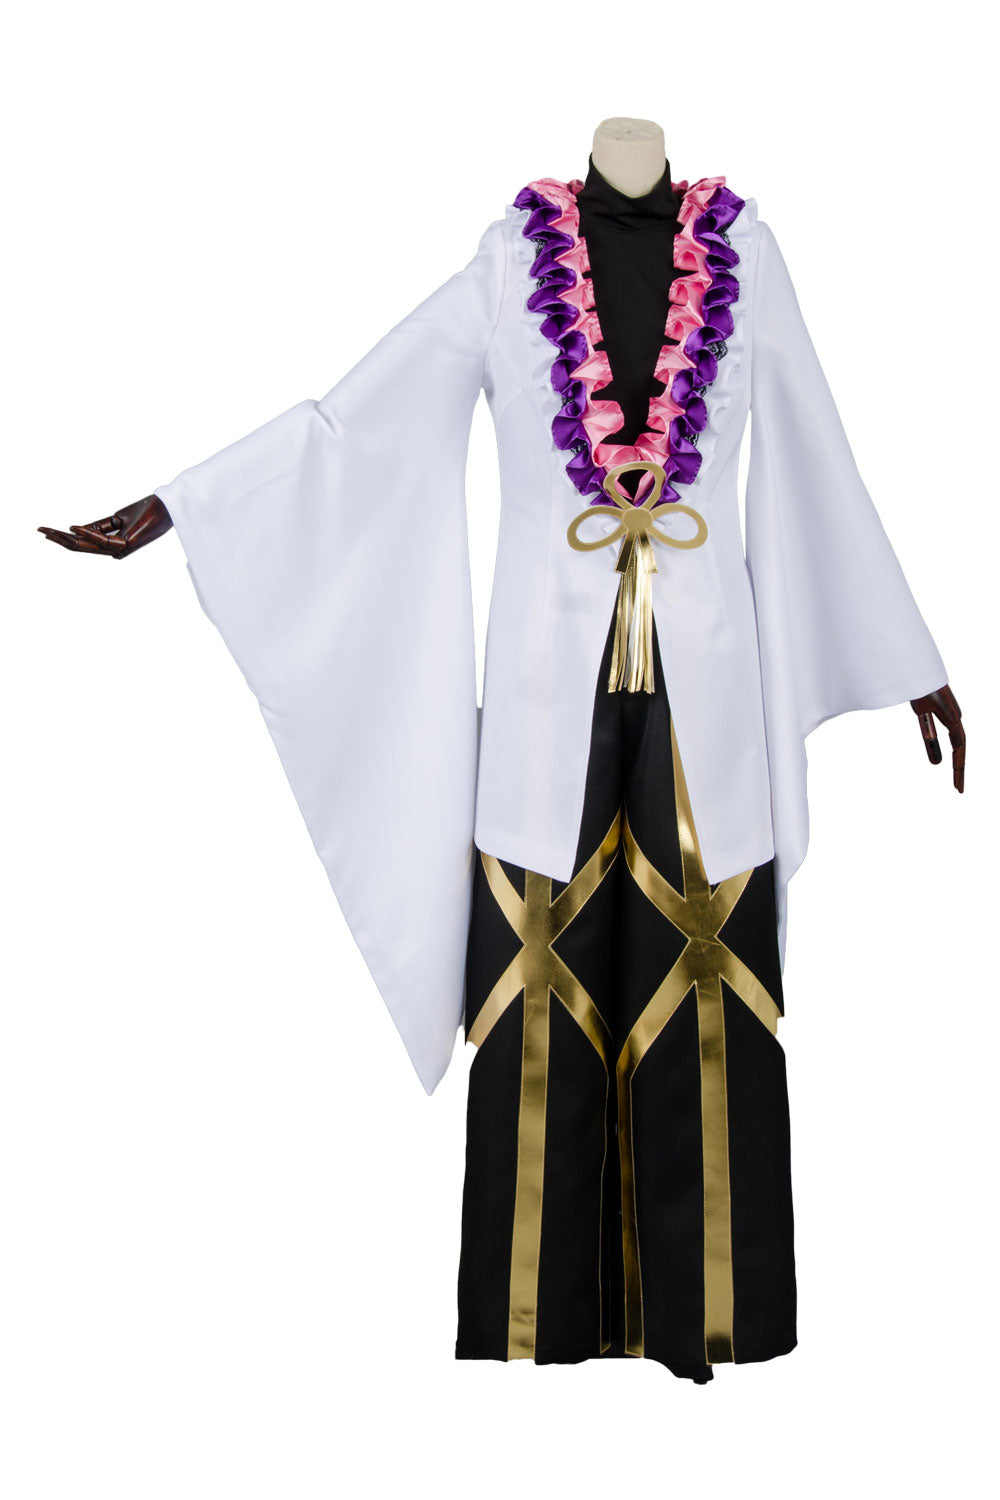 Fate Grand Order Caster Merlin Ambrosius Cosplay Costume